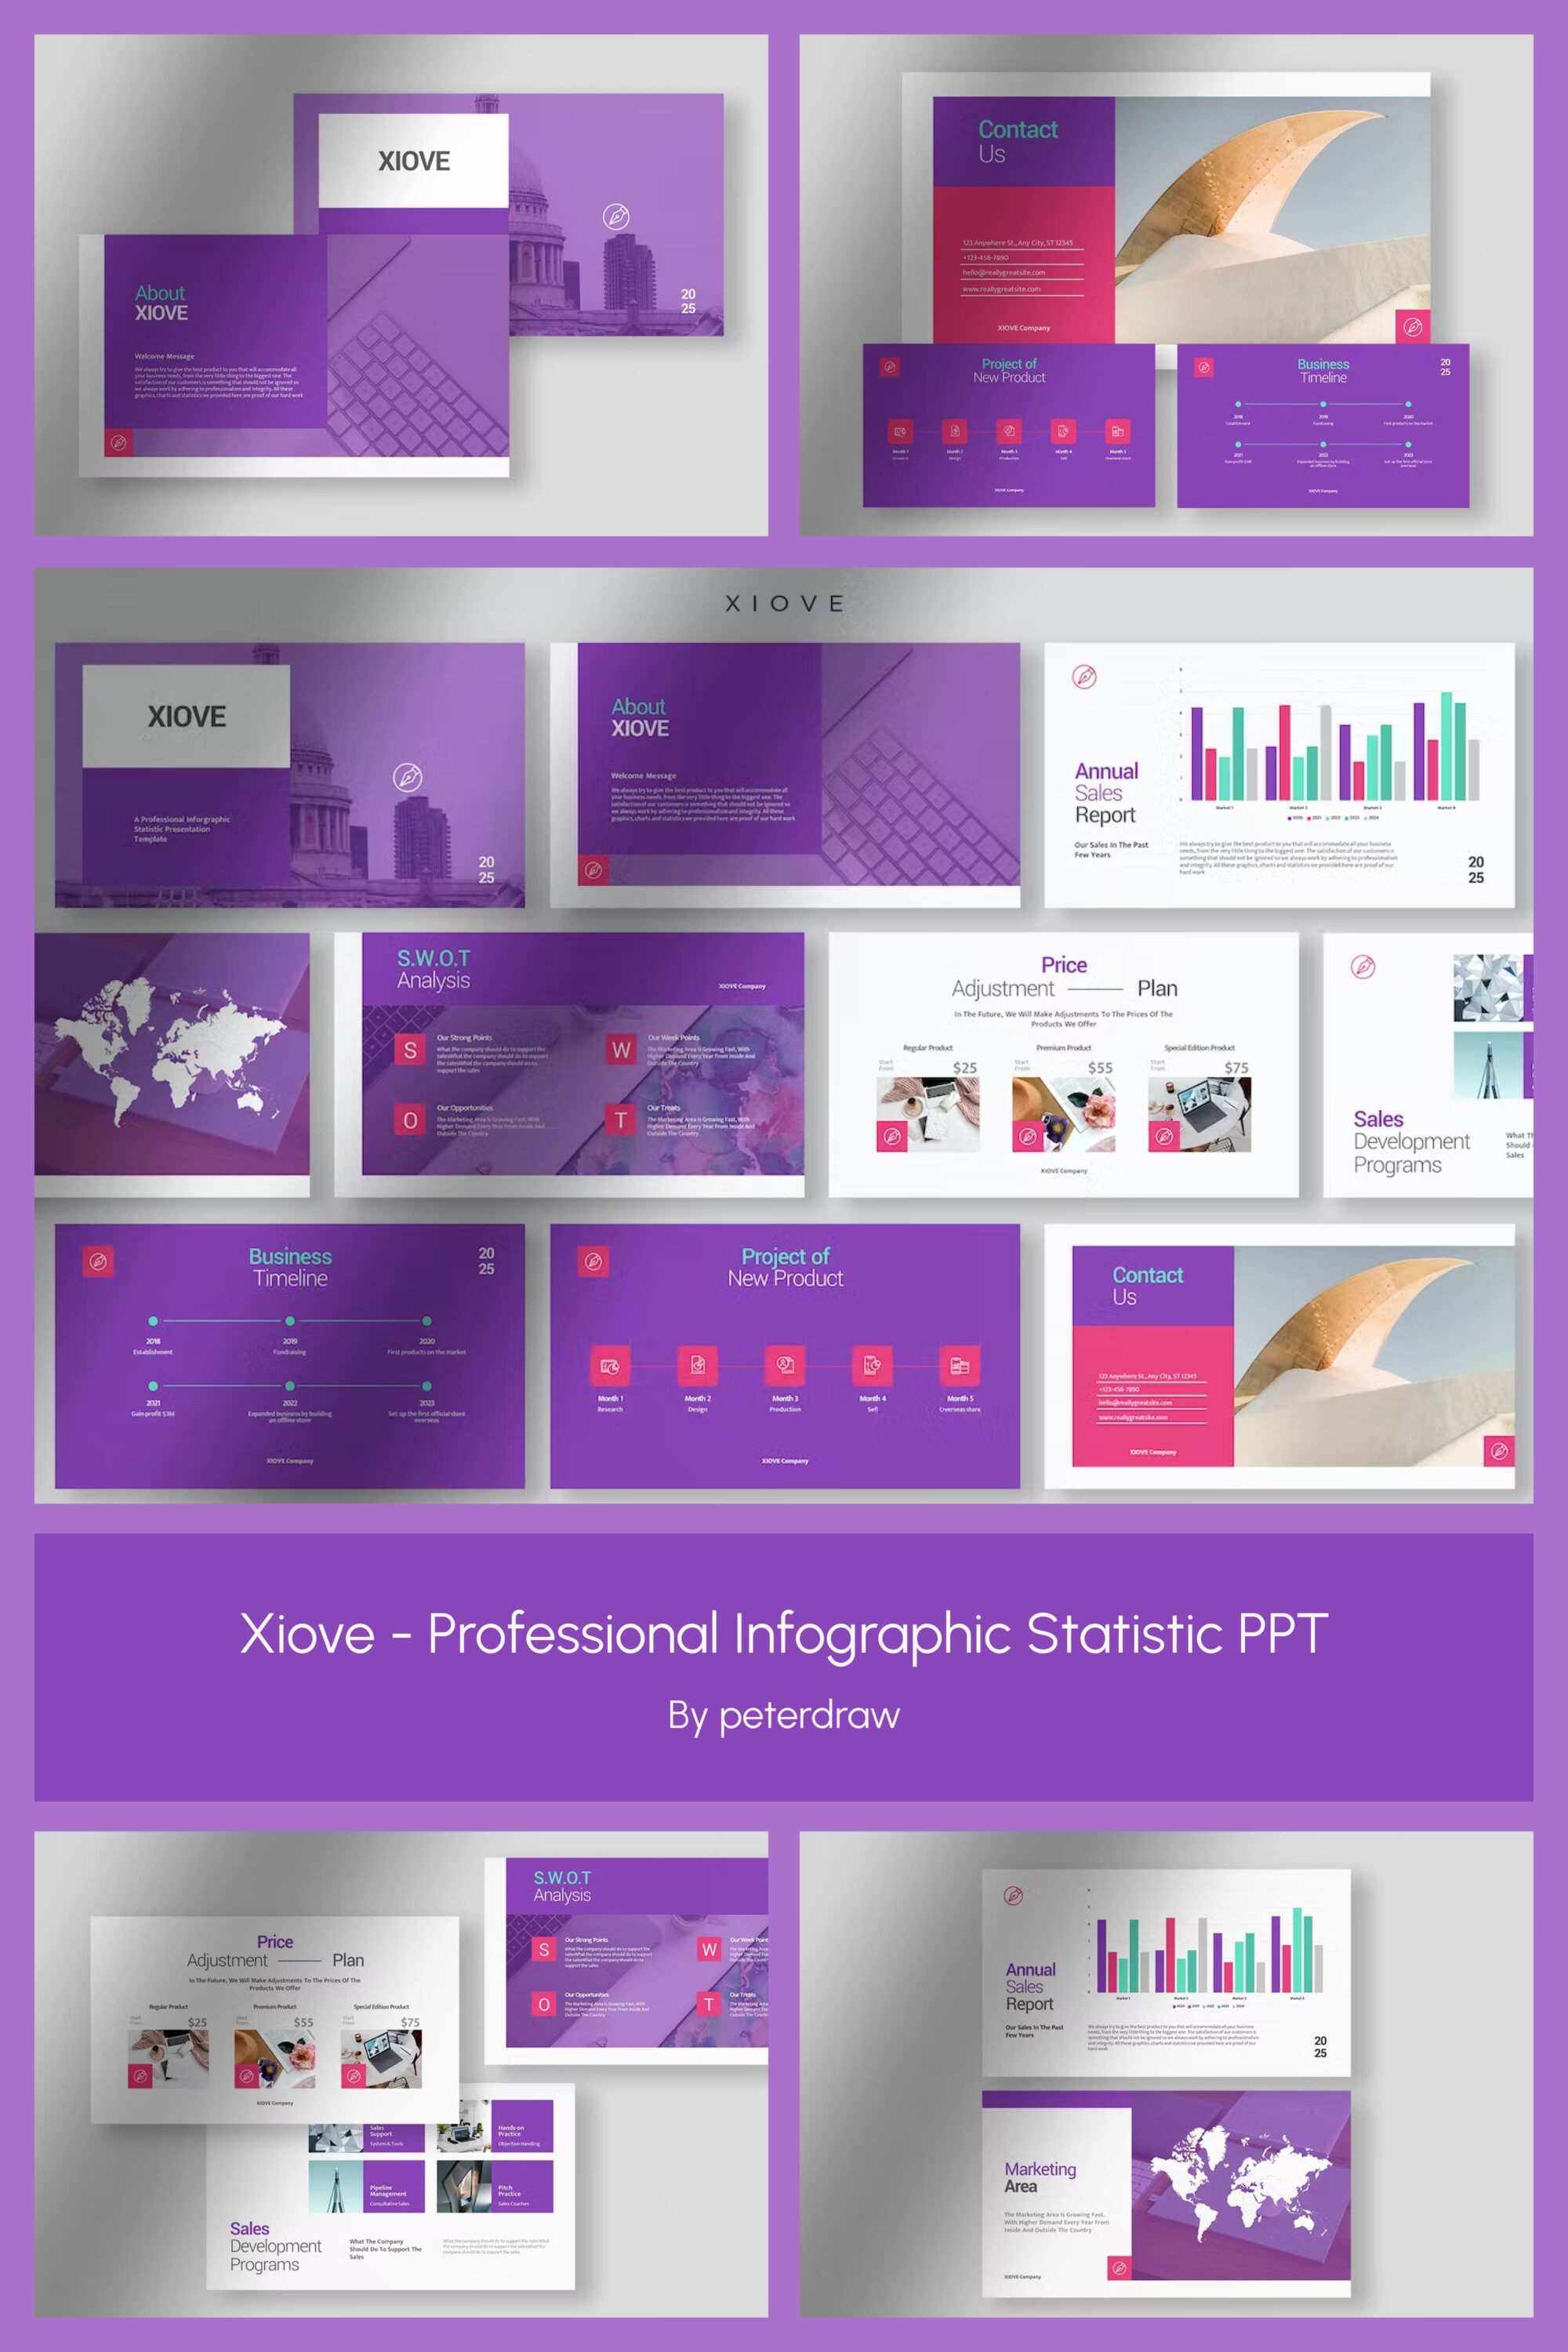 Xiove Professional Infographic Statistic PPT - pinterest image preview.